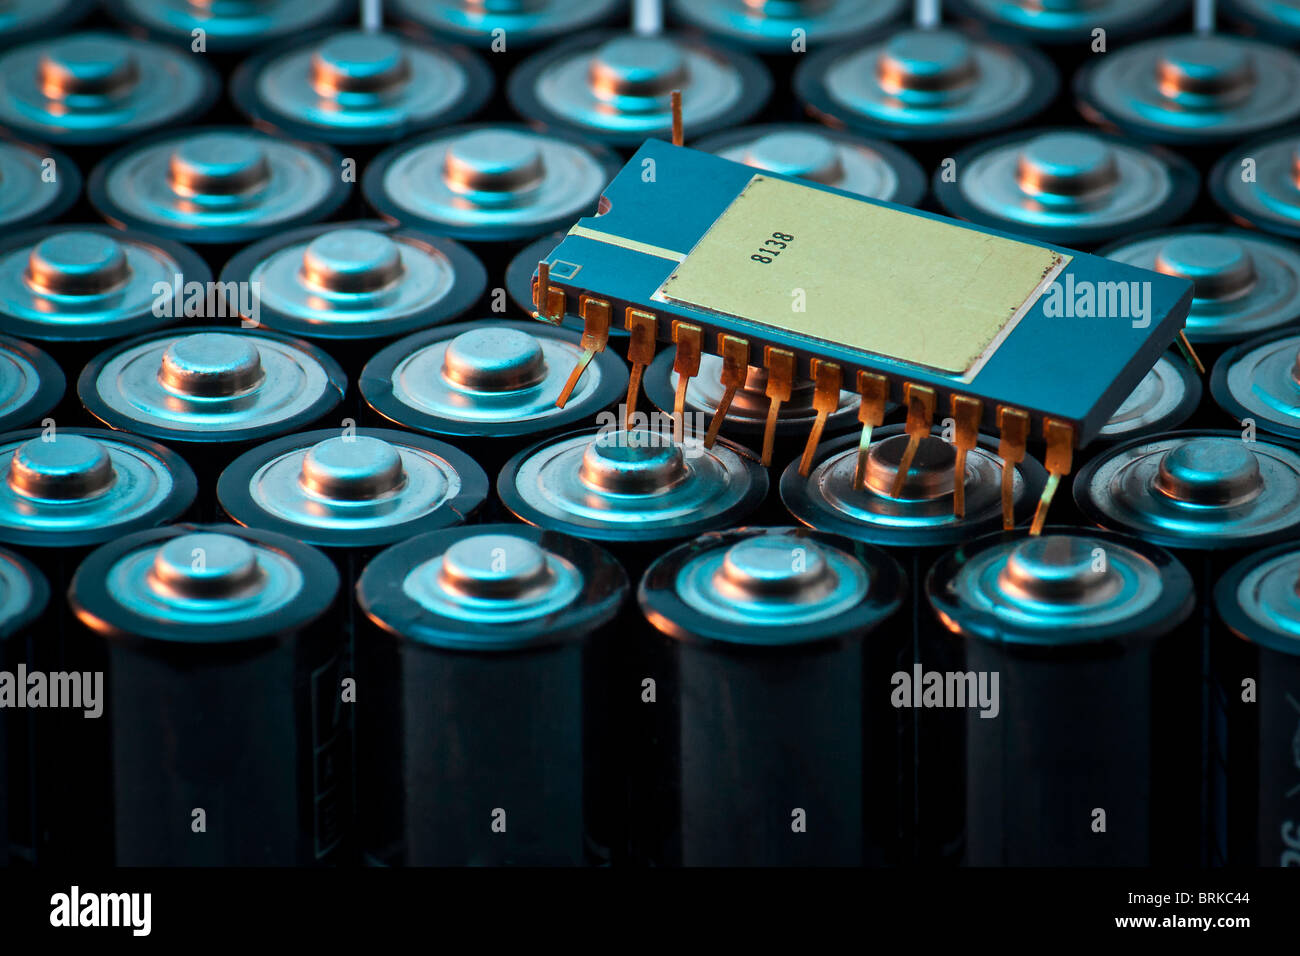 conceptual image of an insect resembling integrated circuit wandering on a cluster of batteries Stock Photo